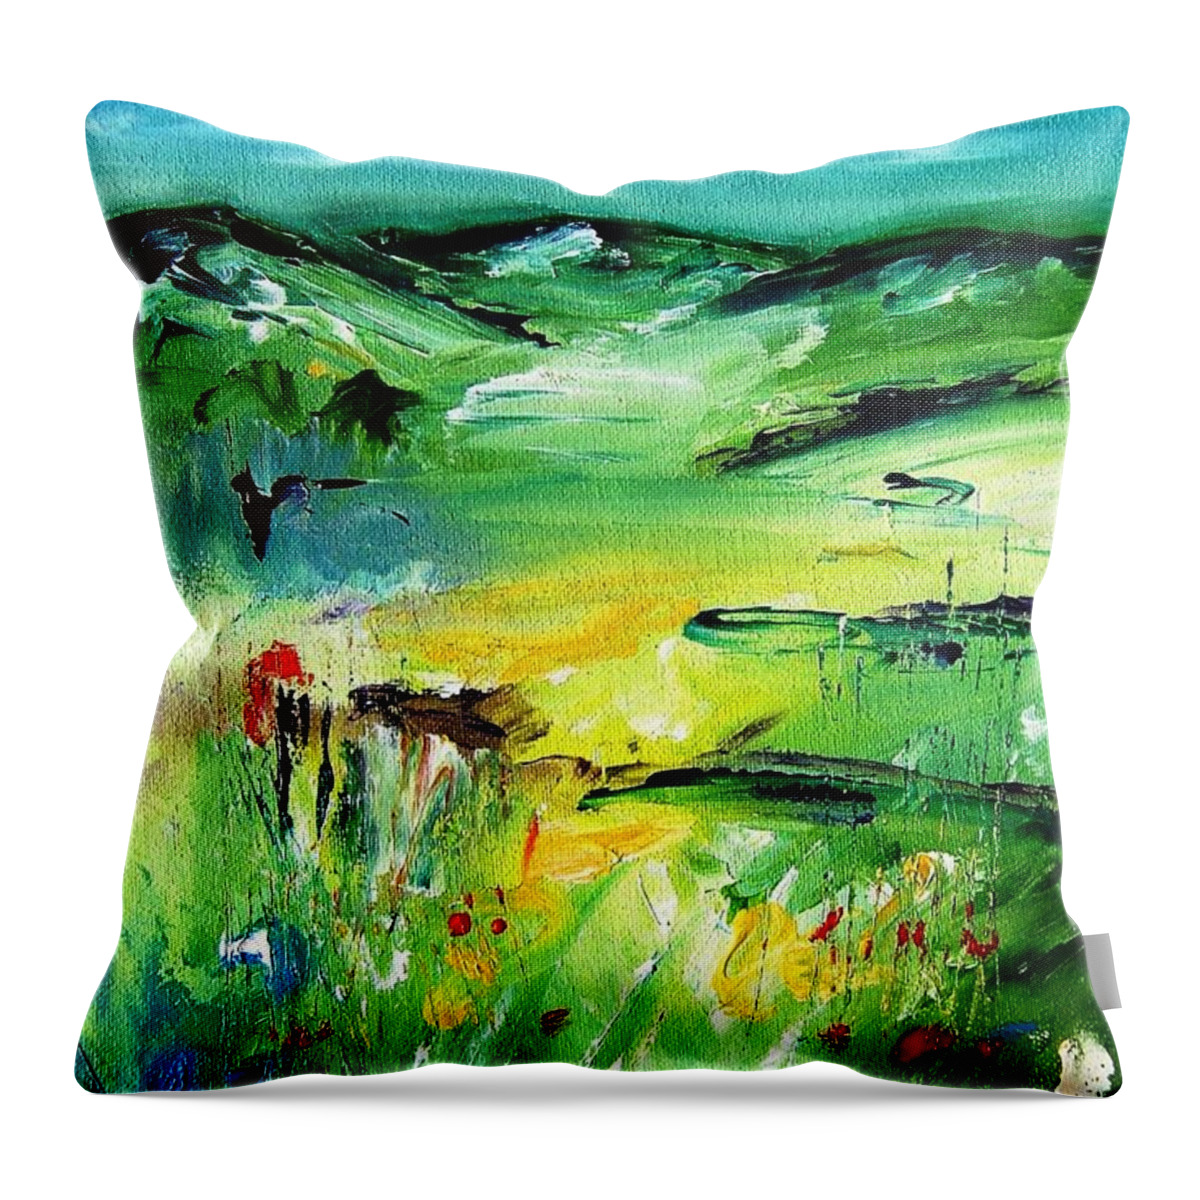 Ireland Throw Pillow featuring the painting Bluegreenscape-available As A Signed And Numbered Art Print On Canvas - See Www.pixi-art.com by Mary Cahalan Lee - aka PIXI